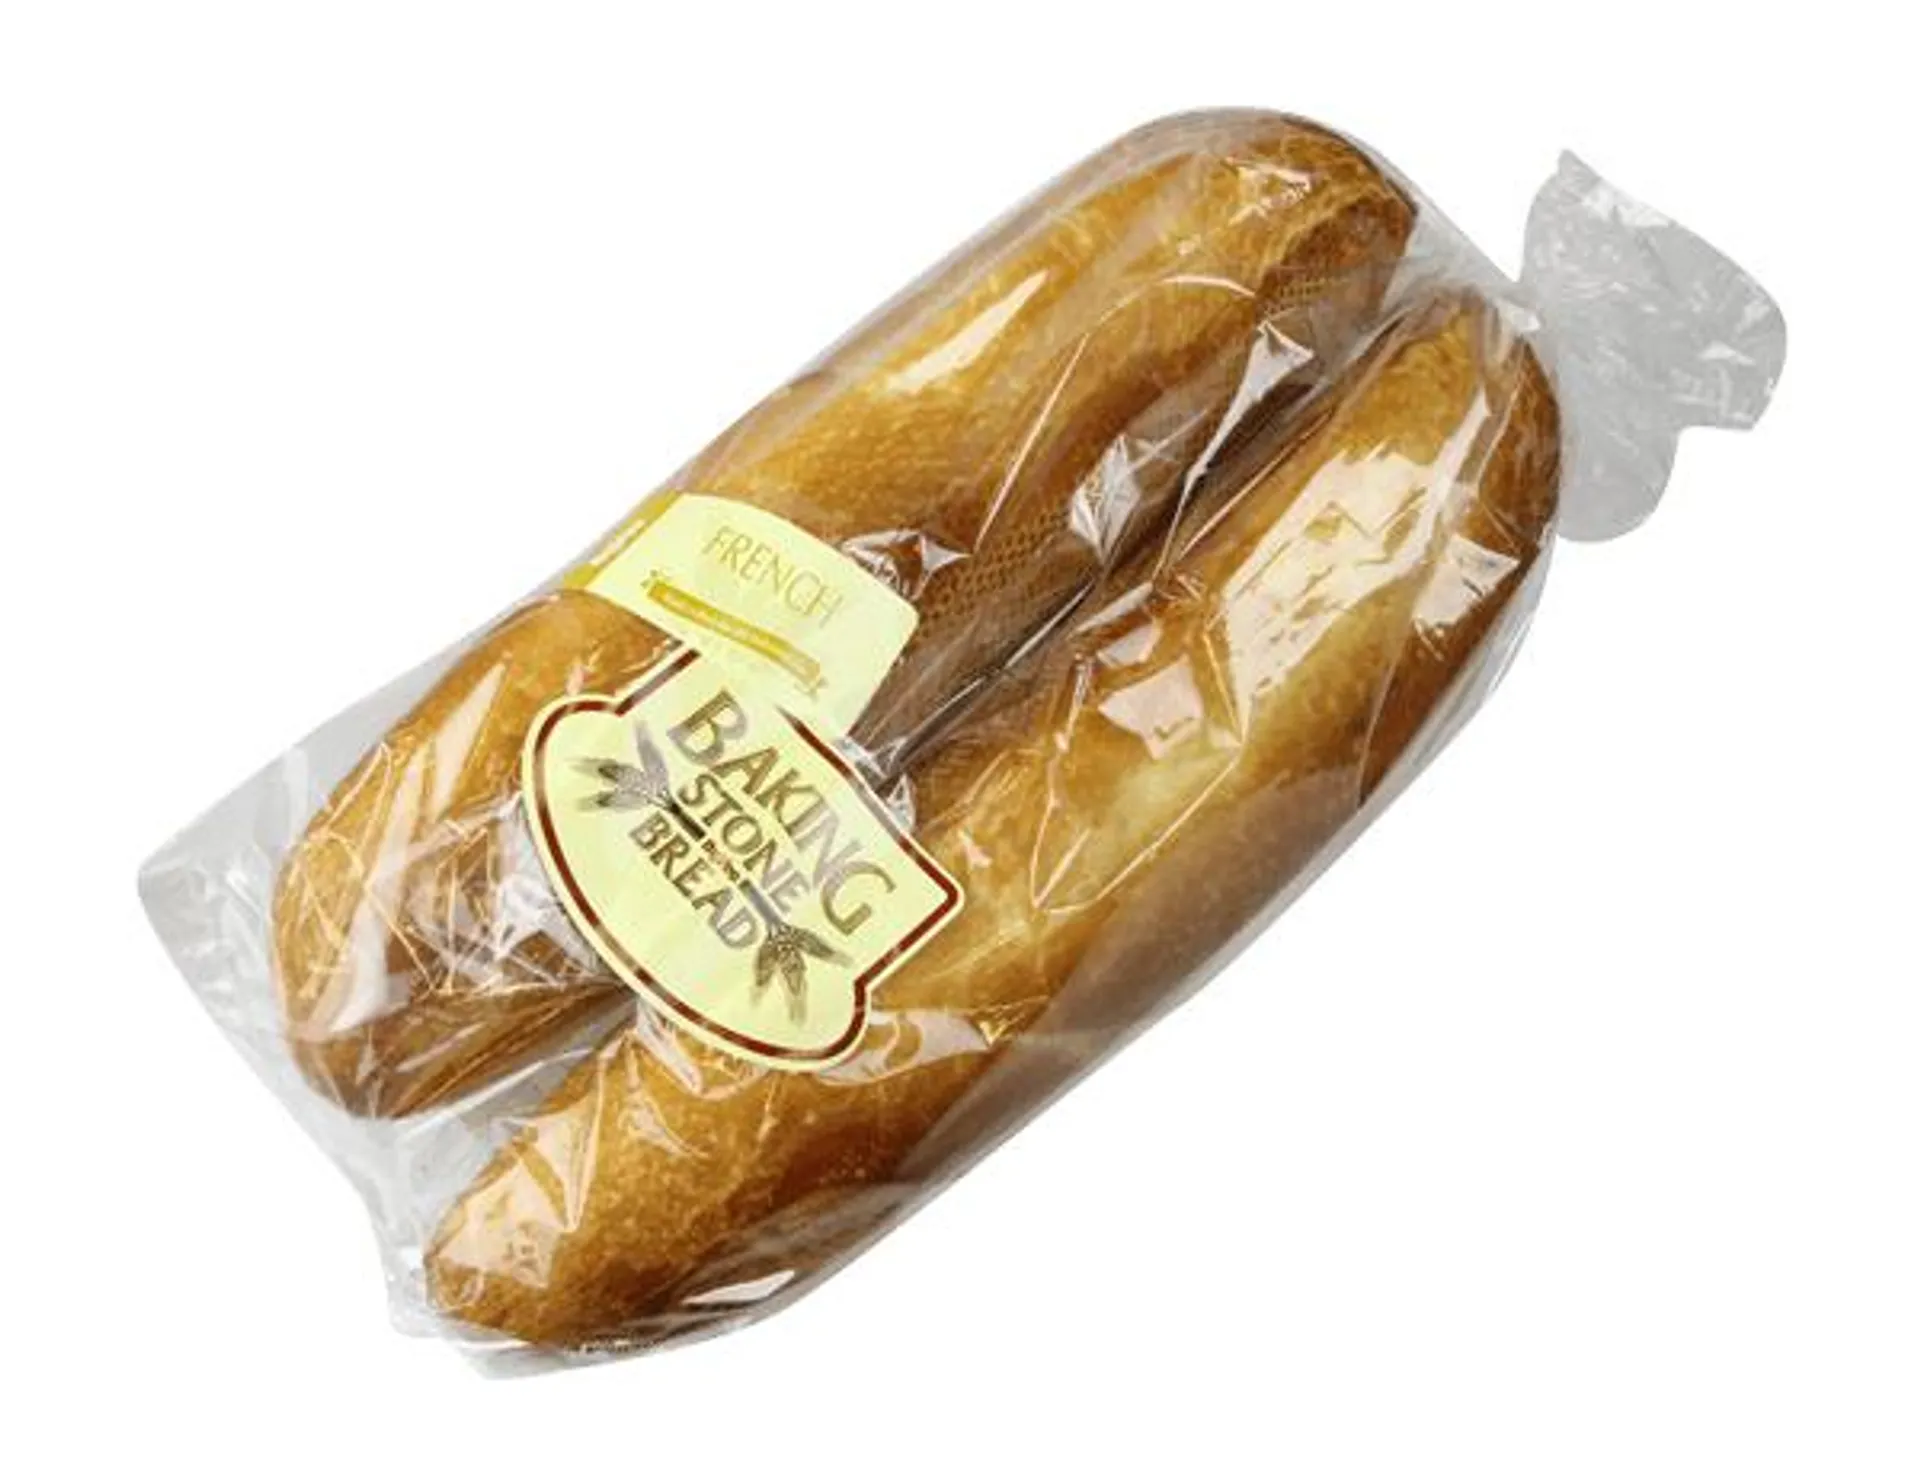 French Loaf 2 Count